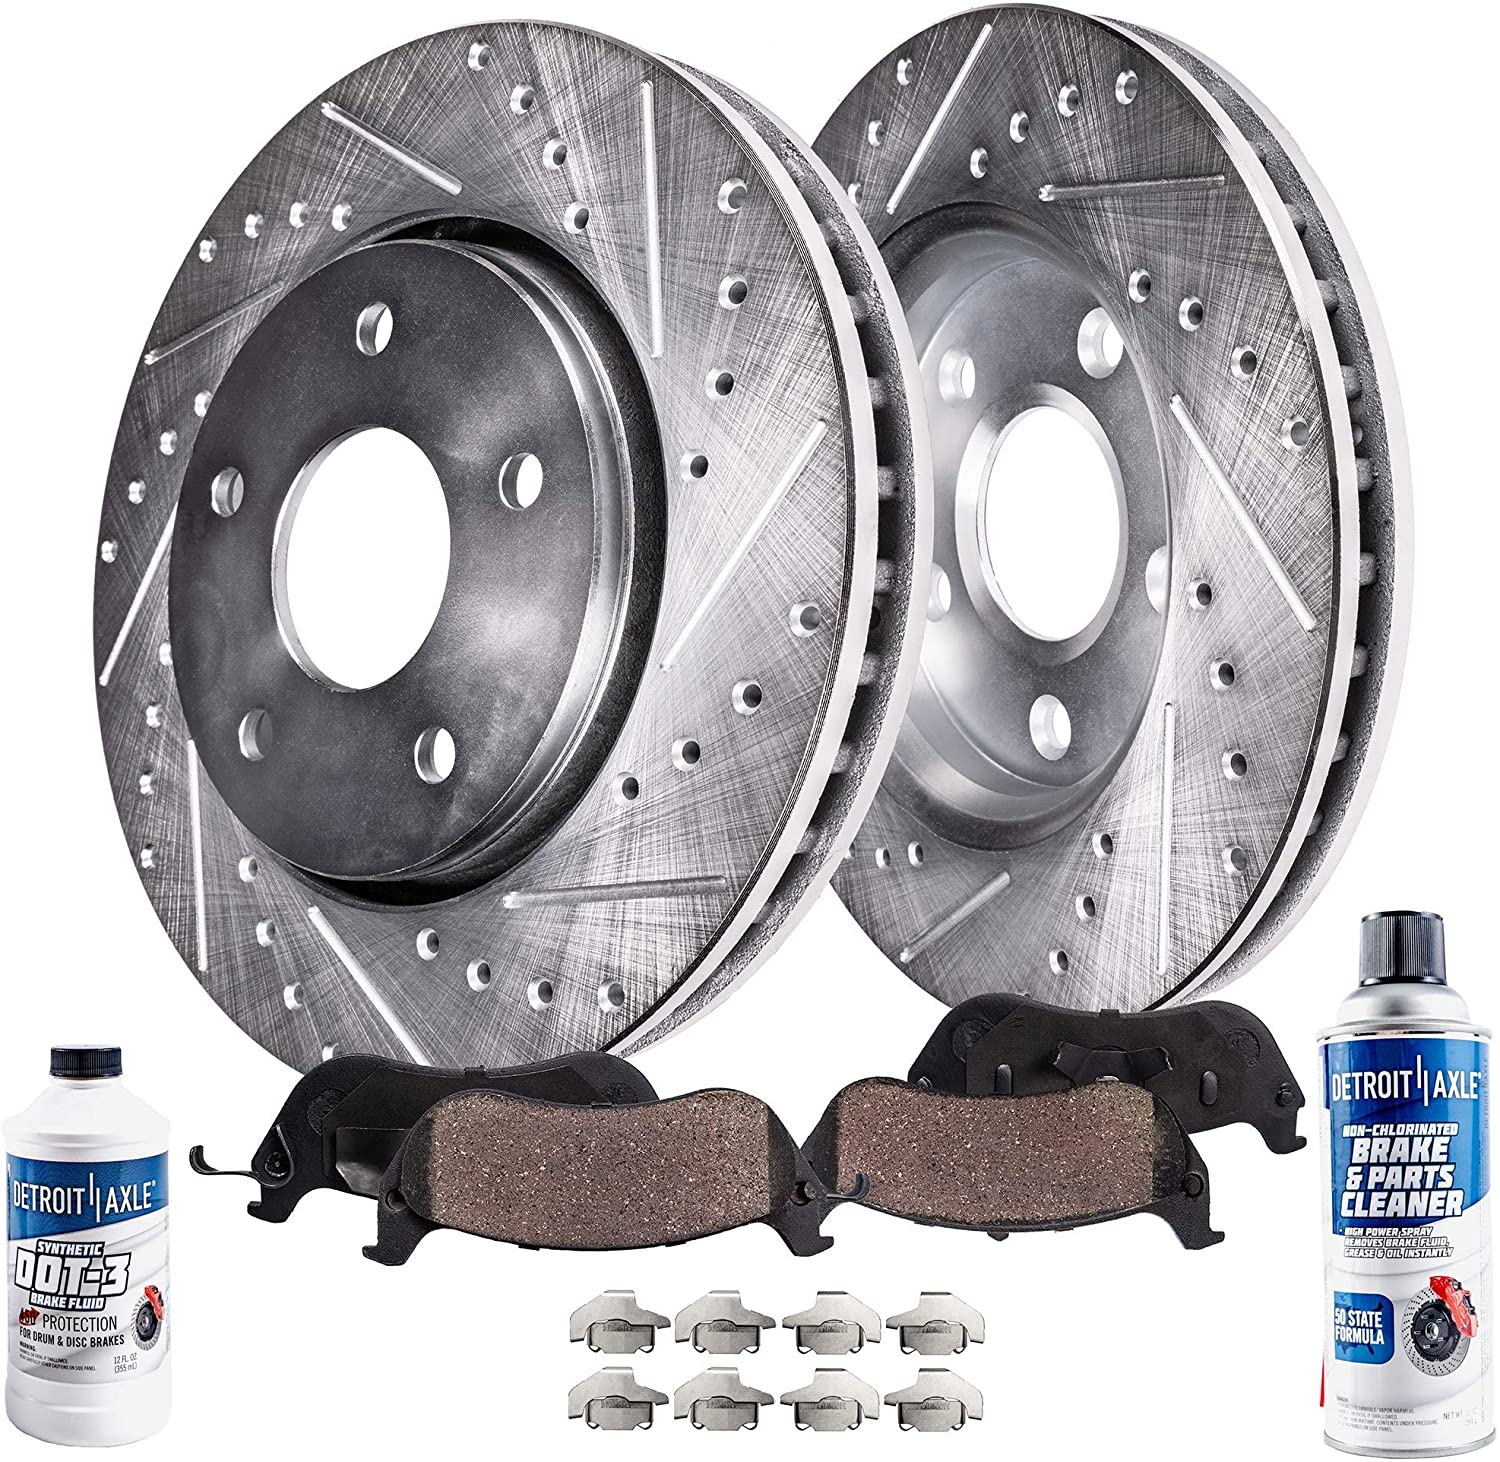 Detroit Axle - Front Drilled and Slotted Disc Brake Kit Rotors w/Ceramic Pads w/Hardware & Brake Kit Cleaner & Fluid for 2007-2011 Honda CR-V - [2010-2011 Accord Crosstour] - 2007-2012 Acura RDX